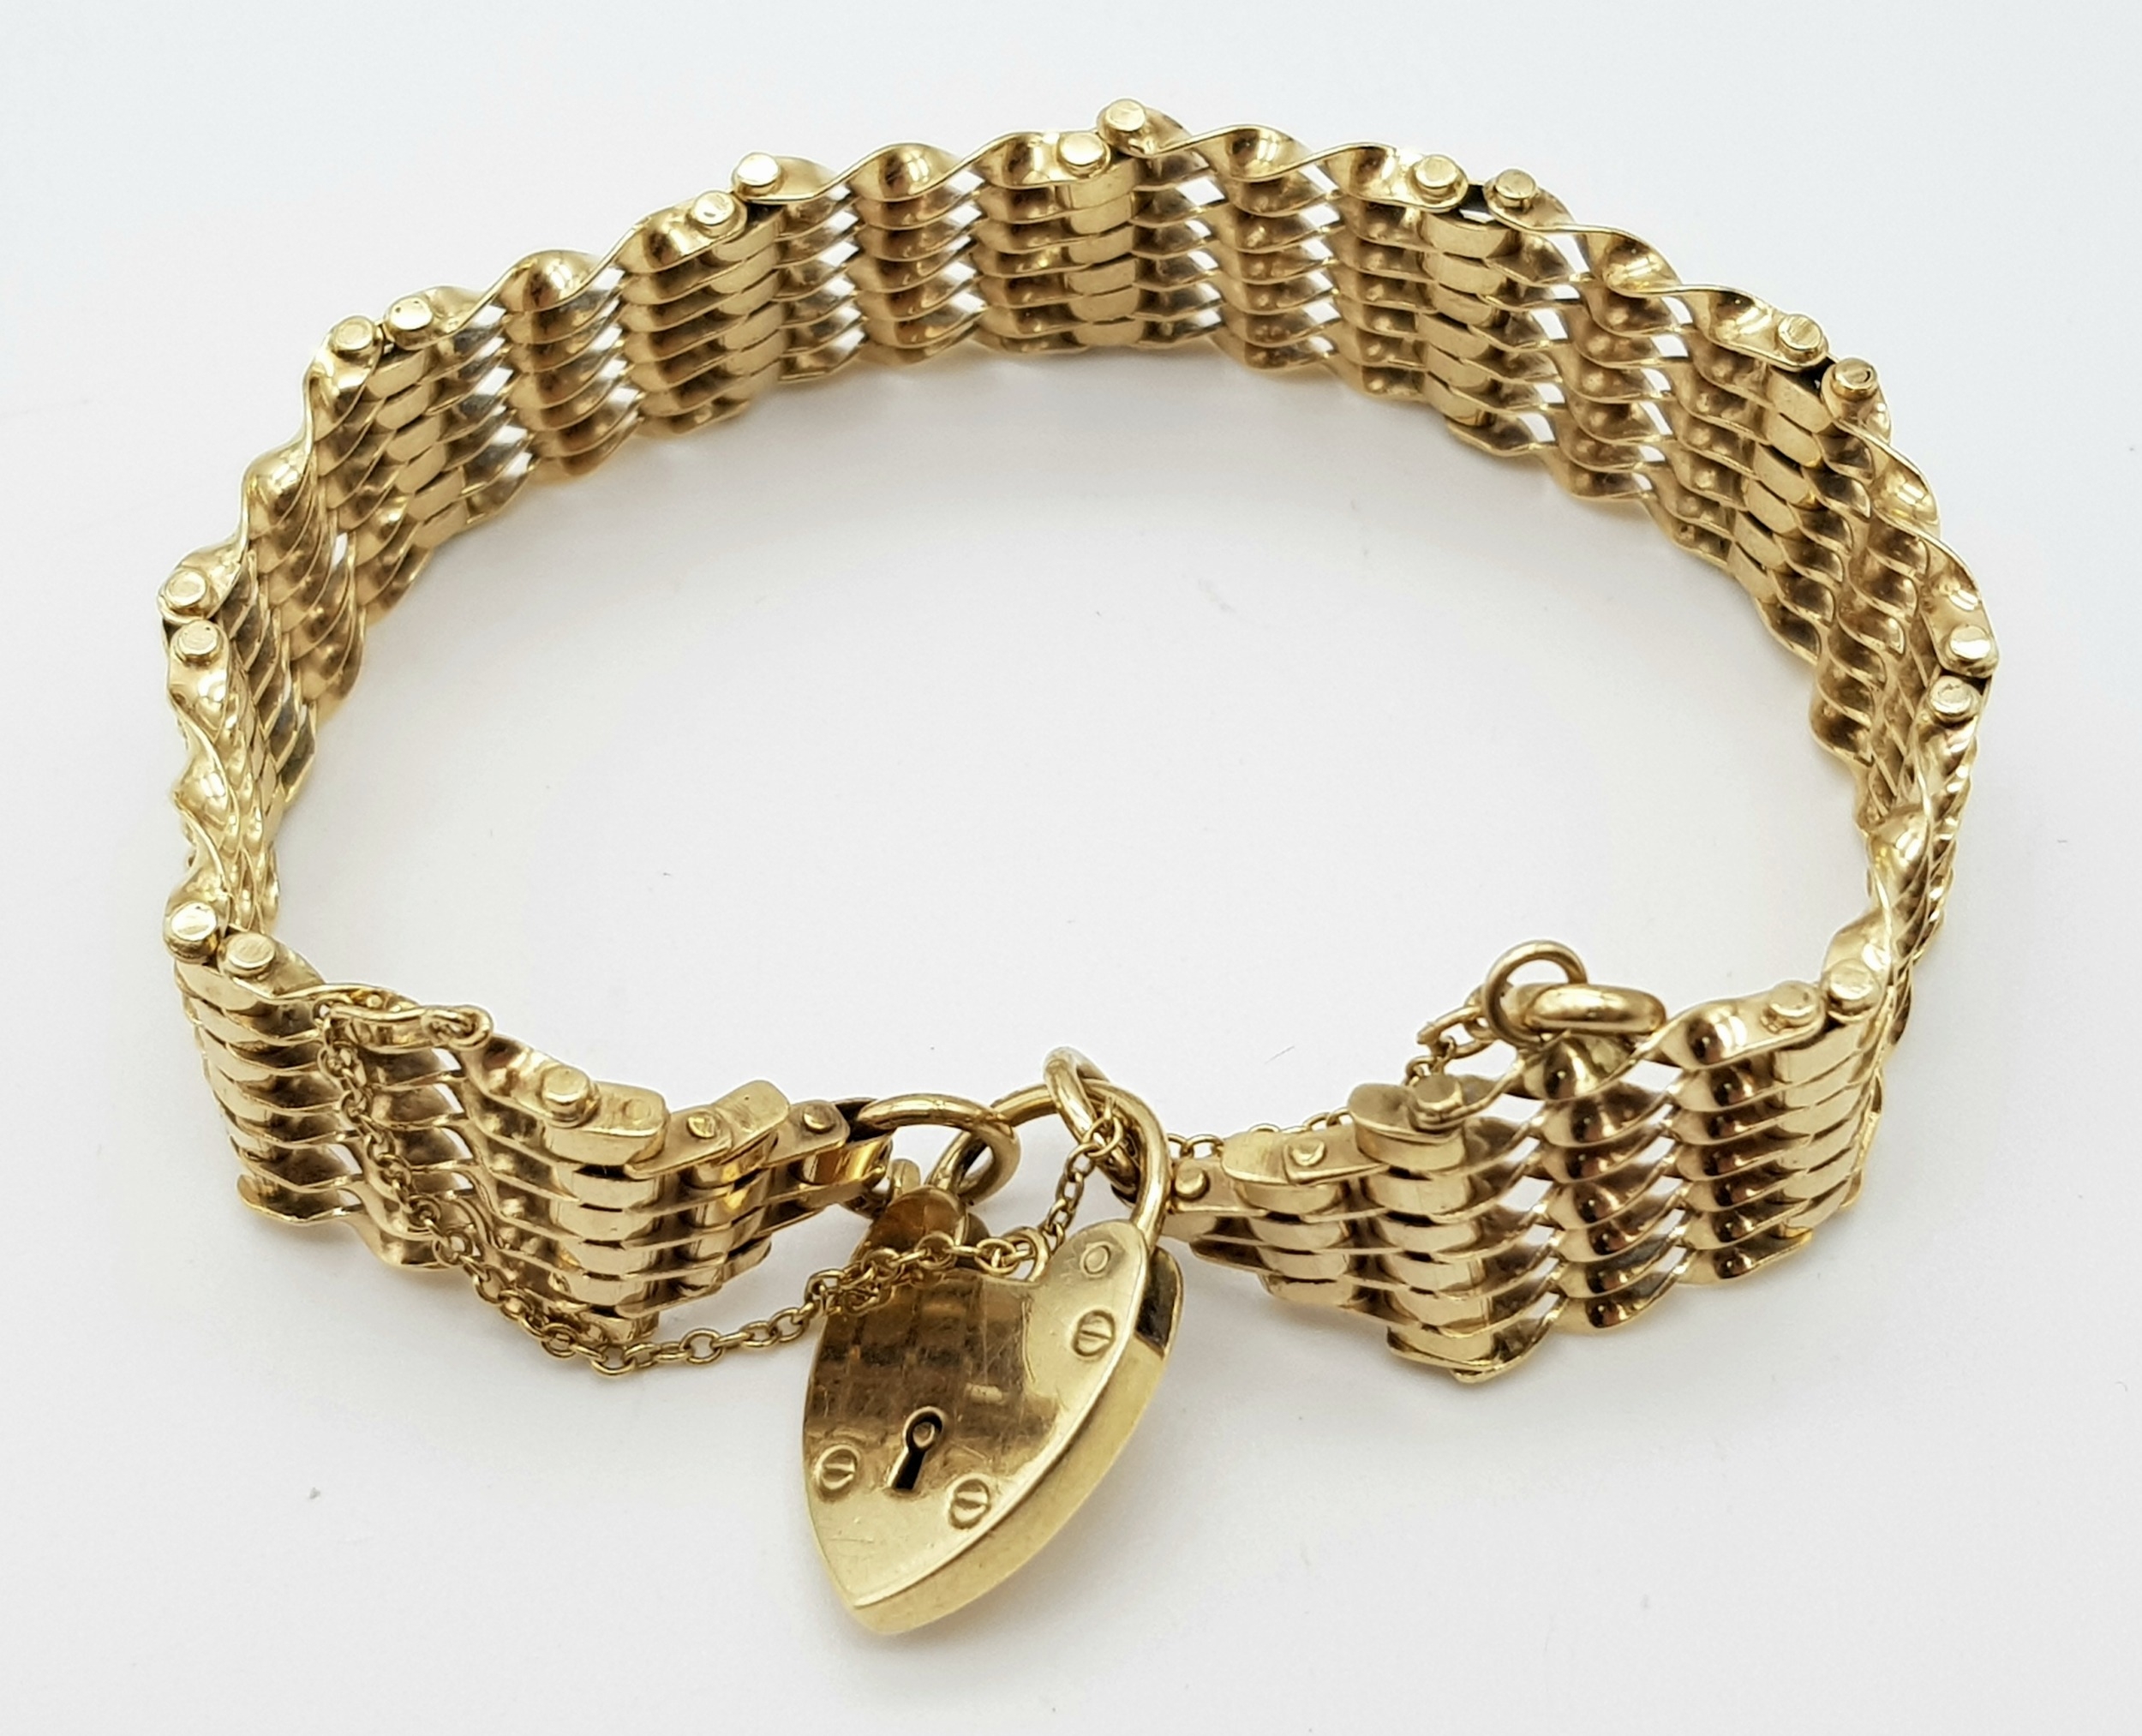 A 9K Yellow Gold gate Bracelet with Heart Clasp. 16mm width. 19.6g weight. - Image 3 of 6